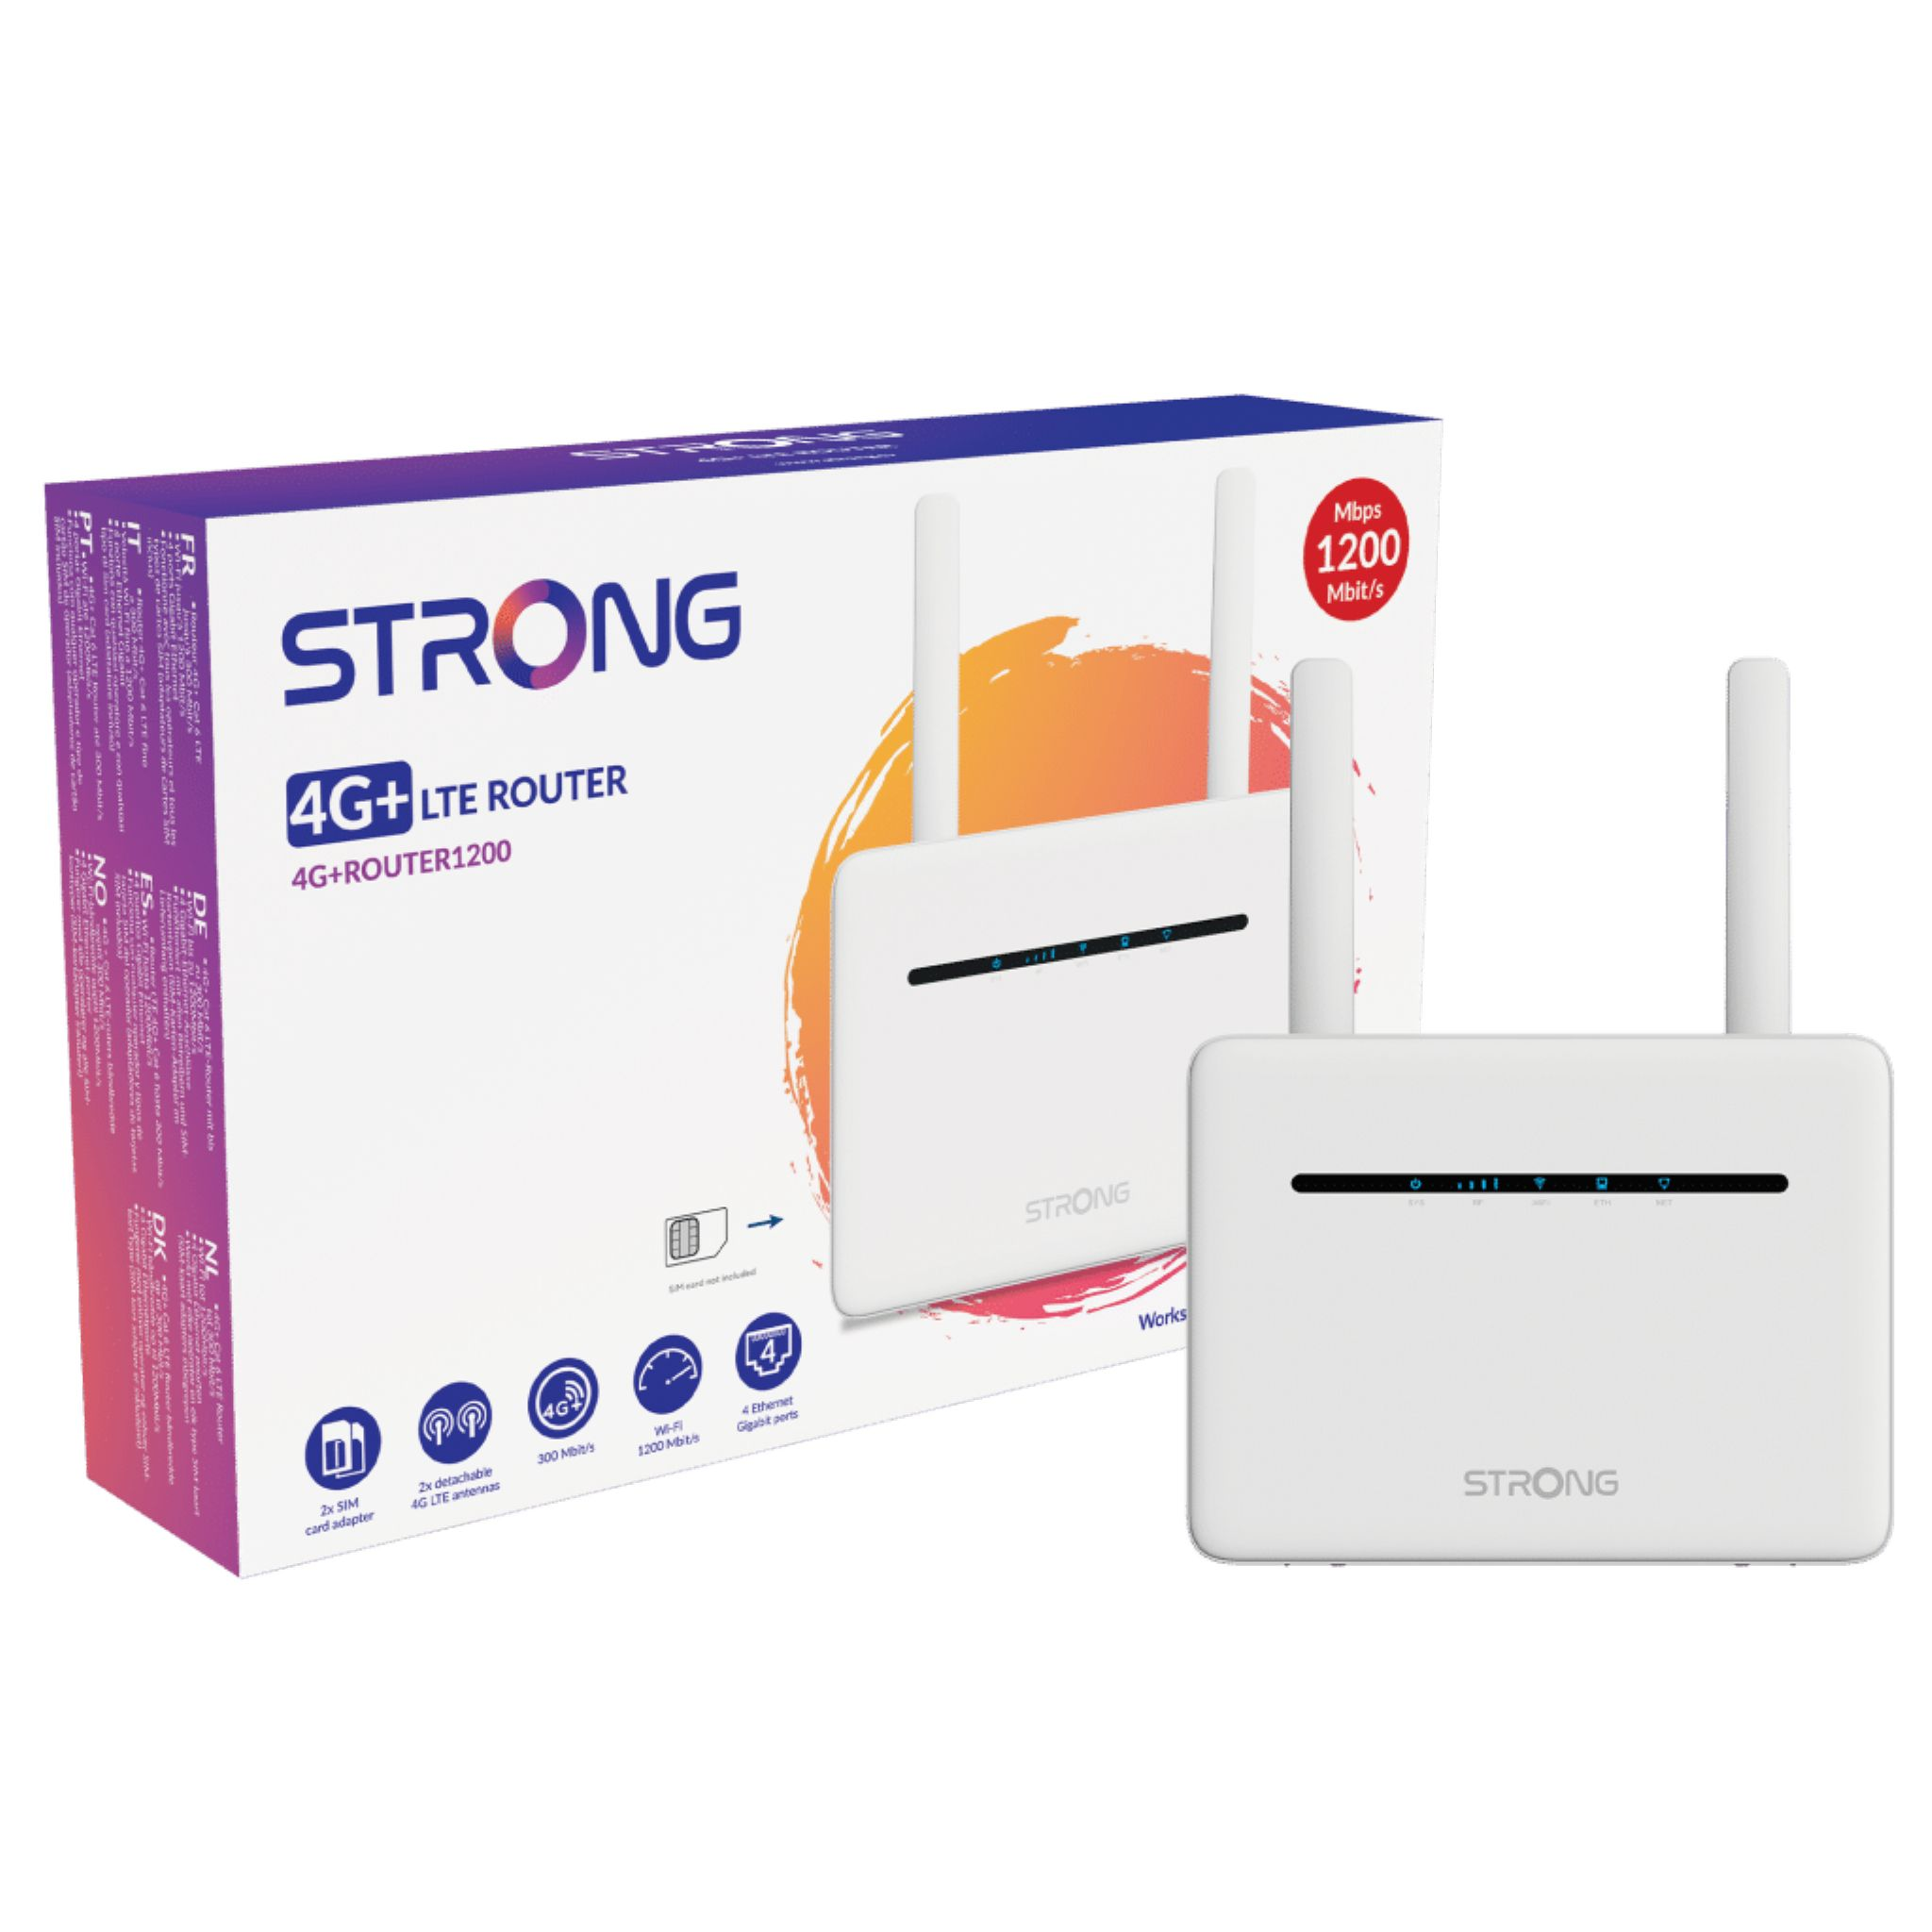 STRONG 1200 4G+ Router